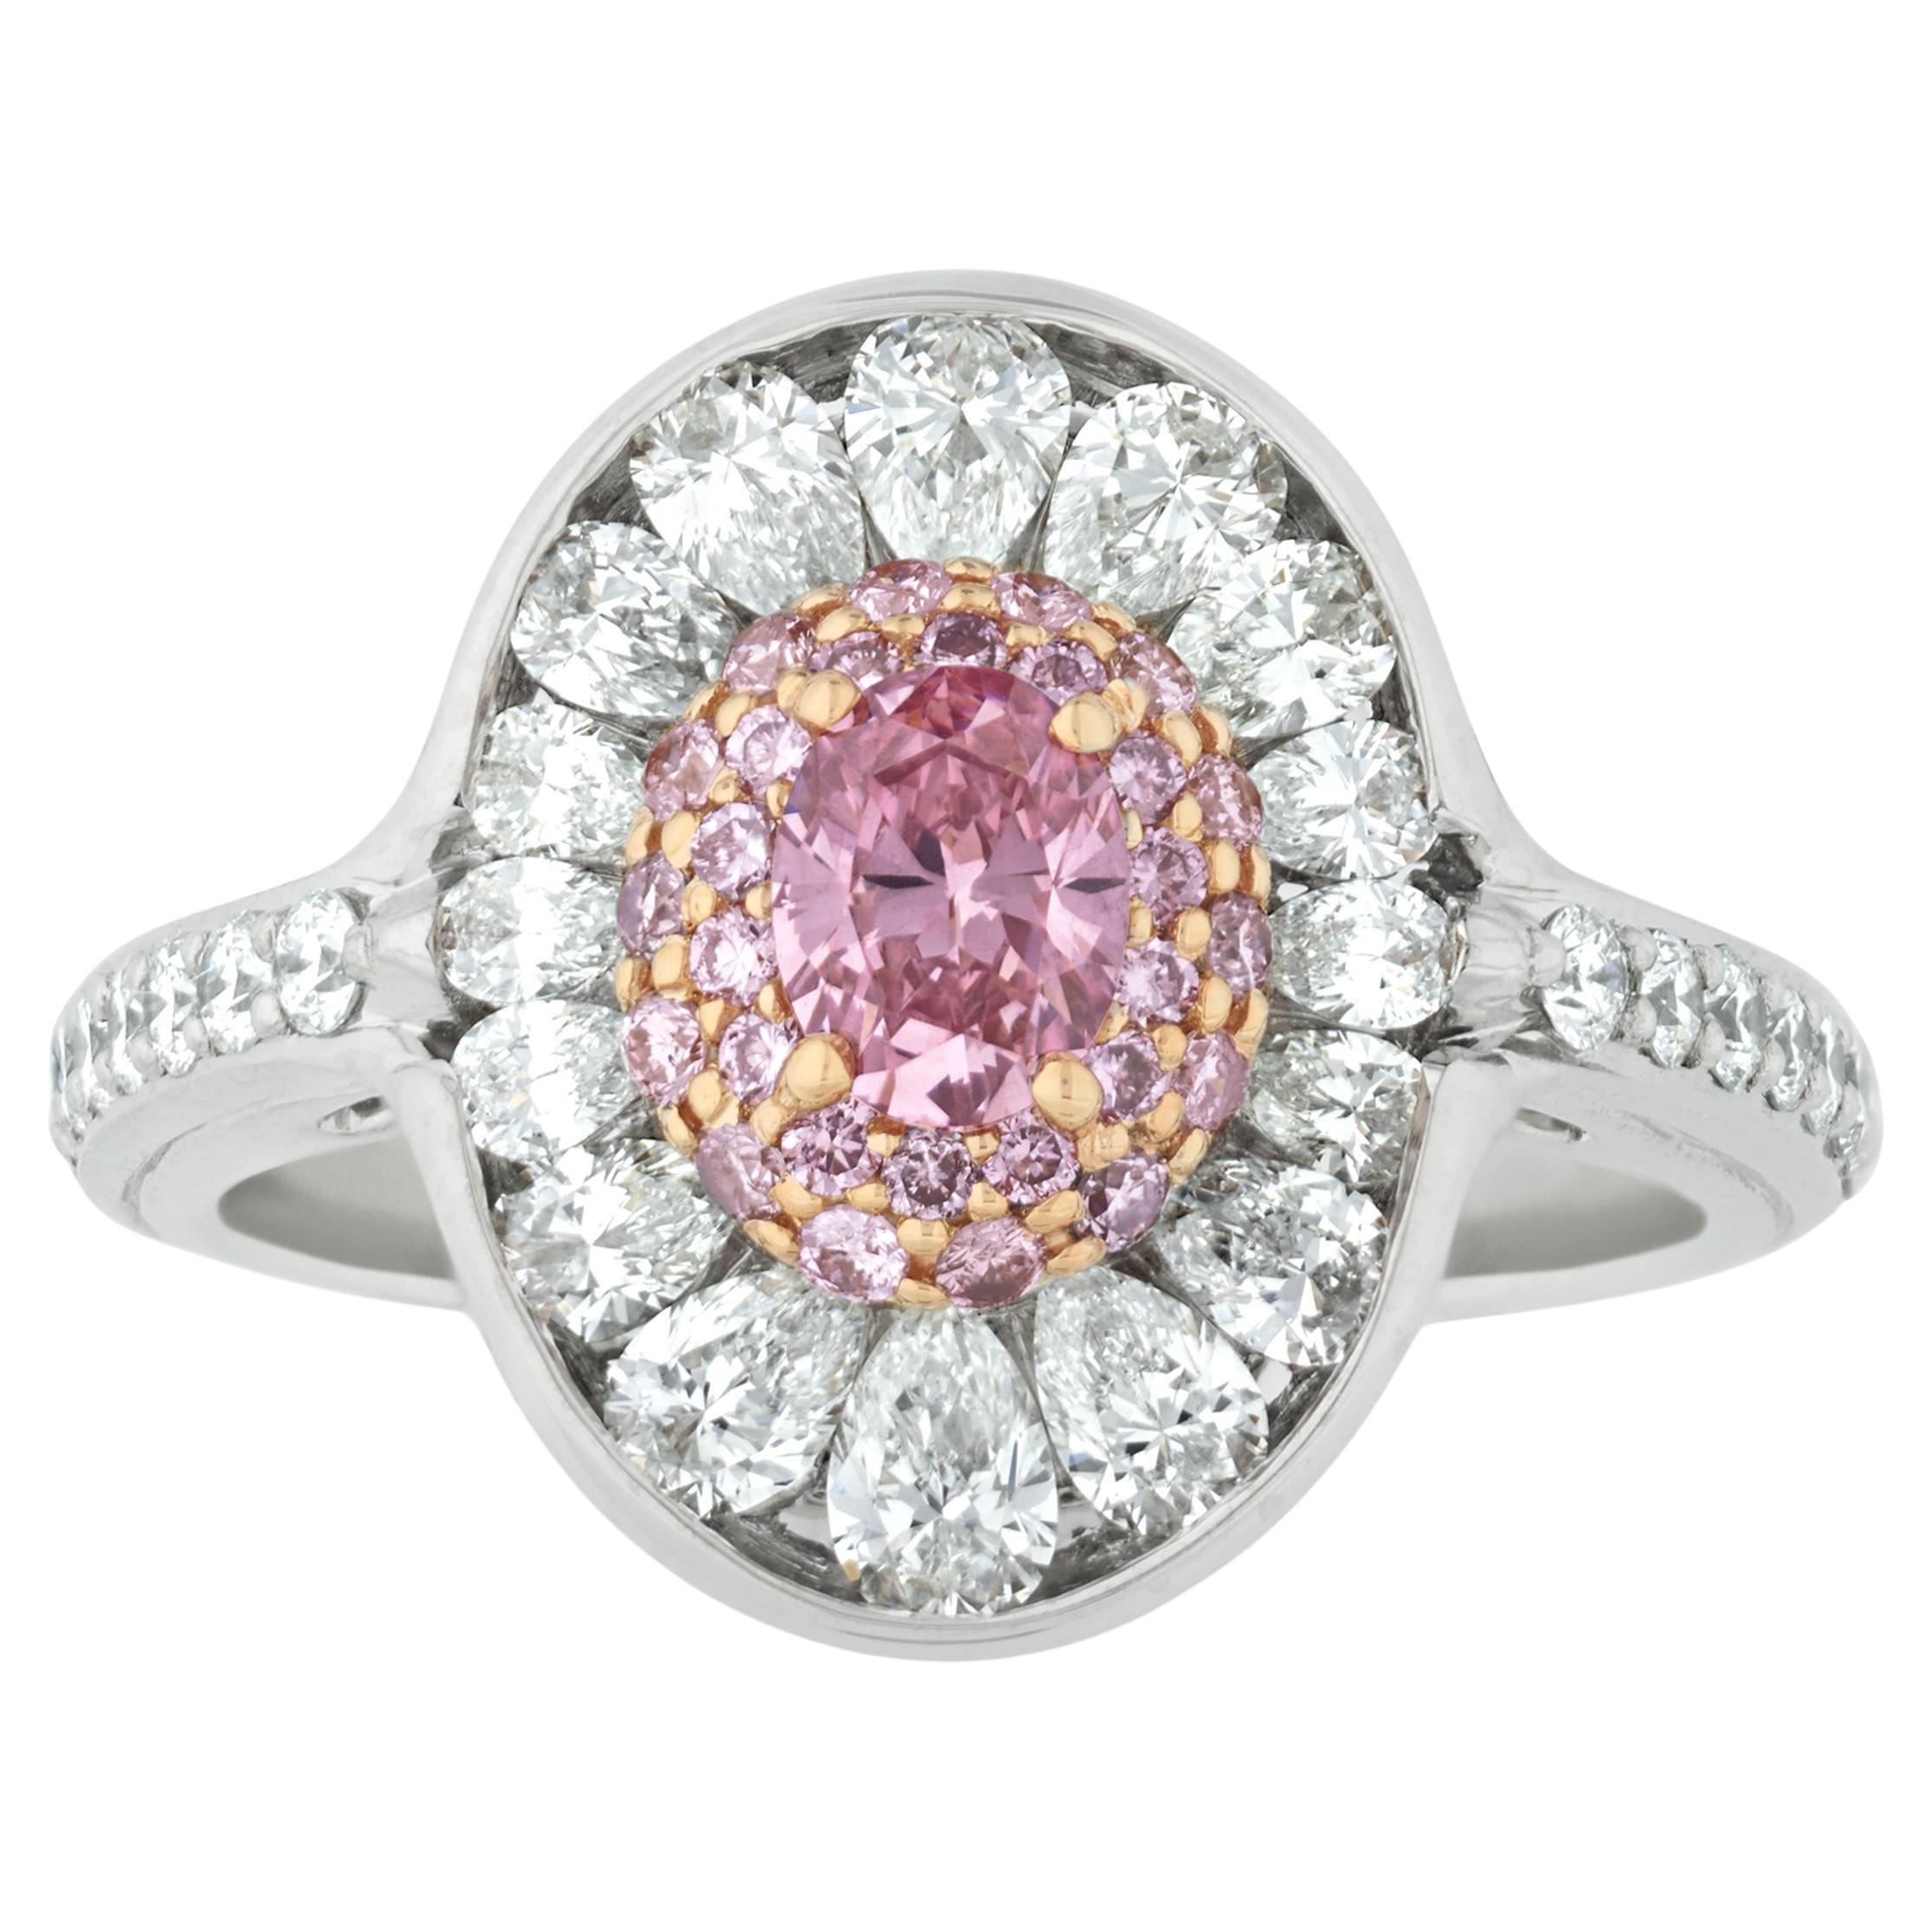 Fancy Vivid Pink And White Diamond Ring